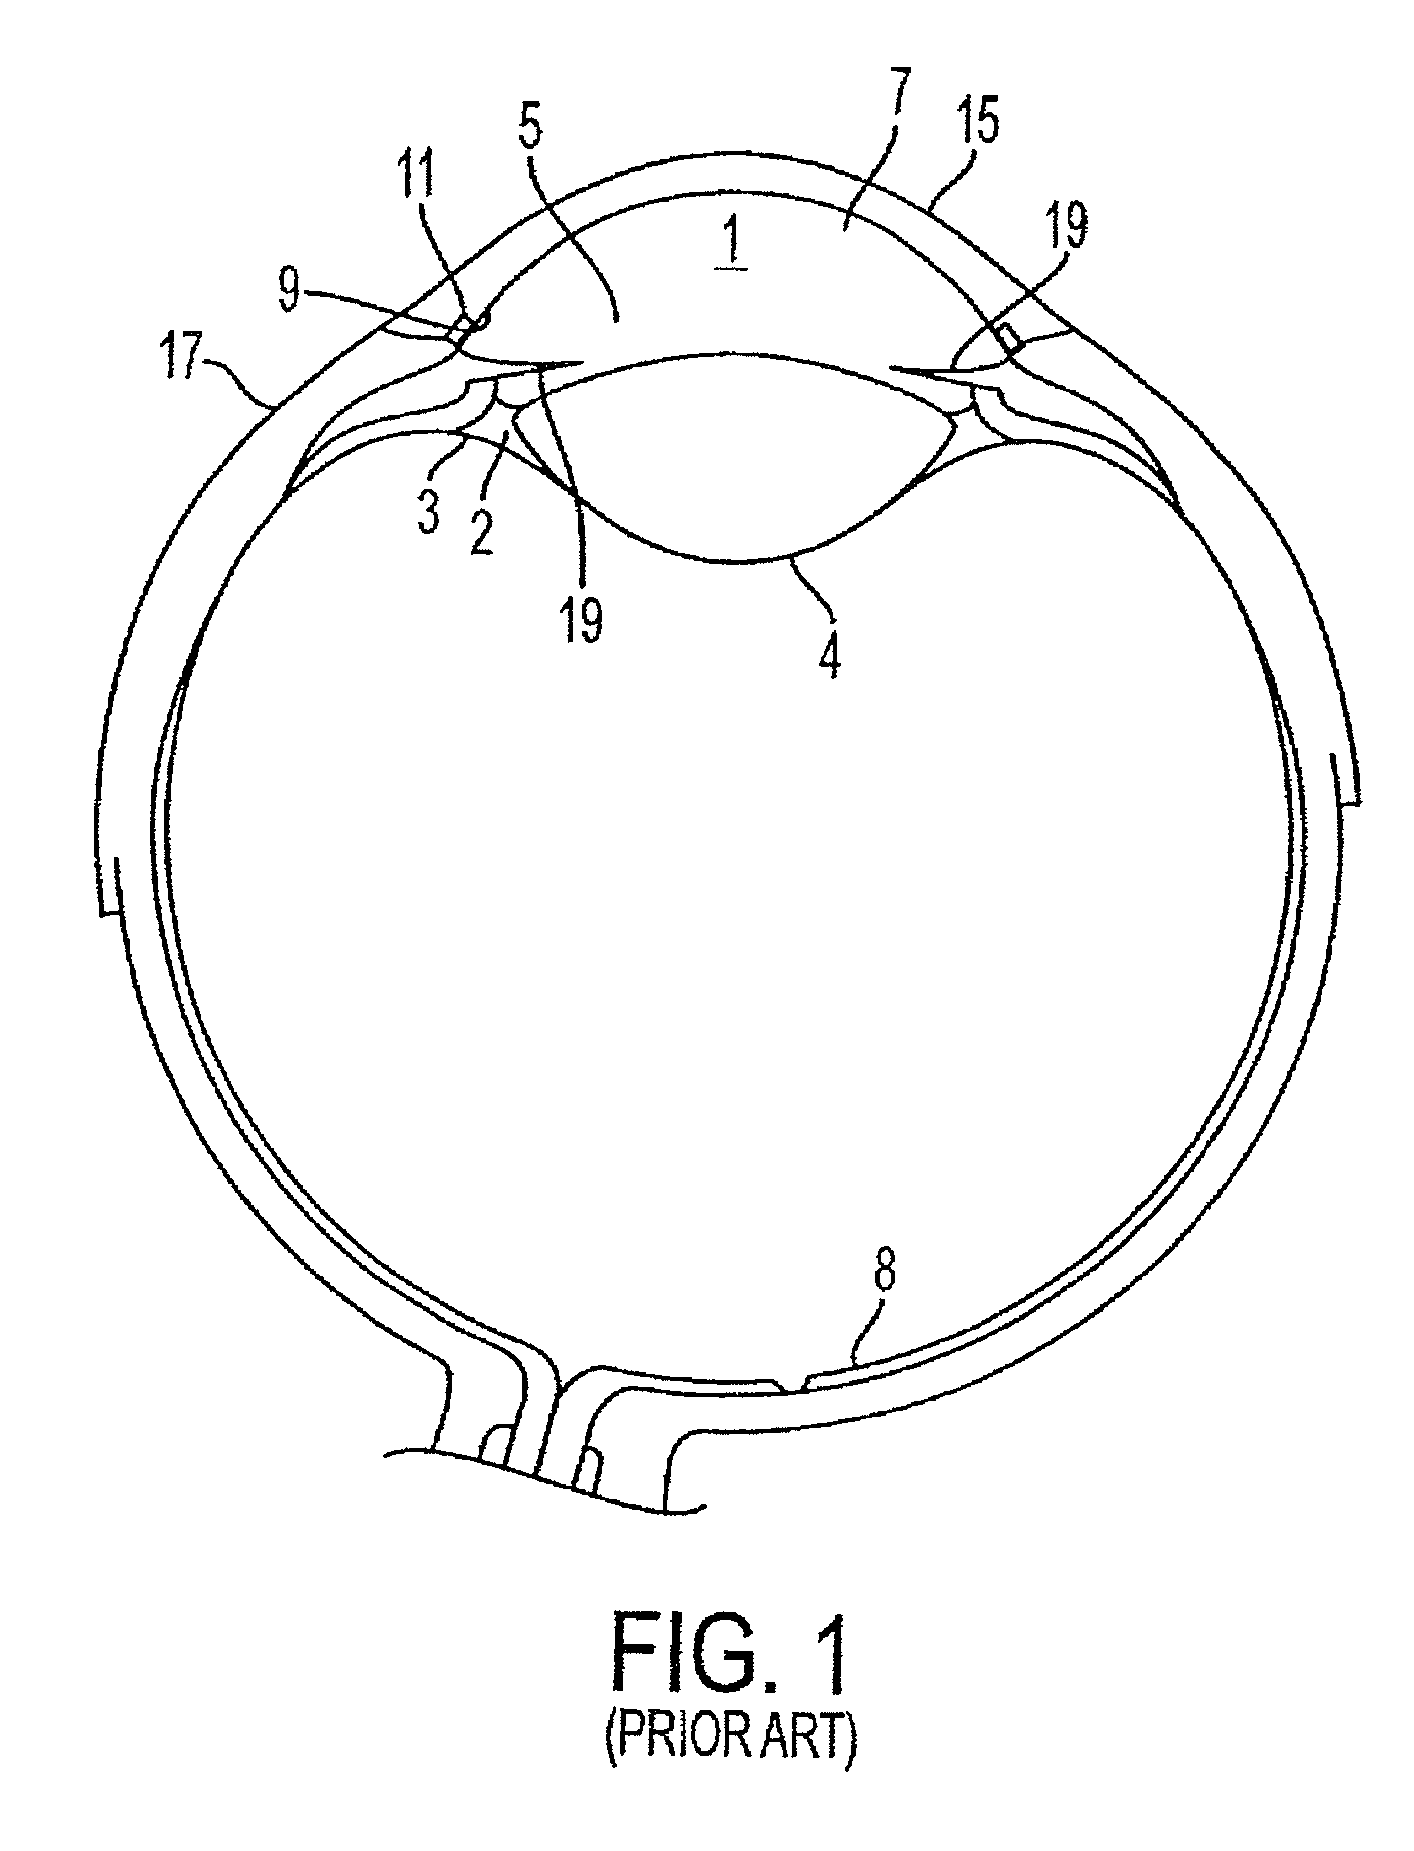 Delivery system and method of use for the eye